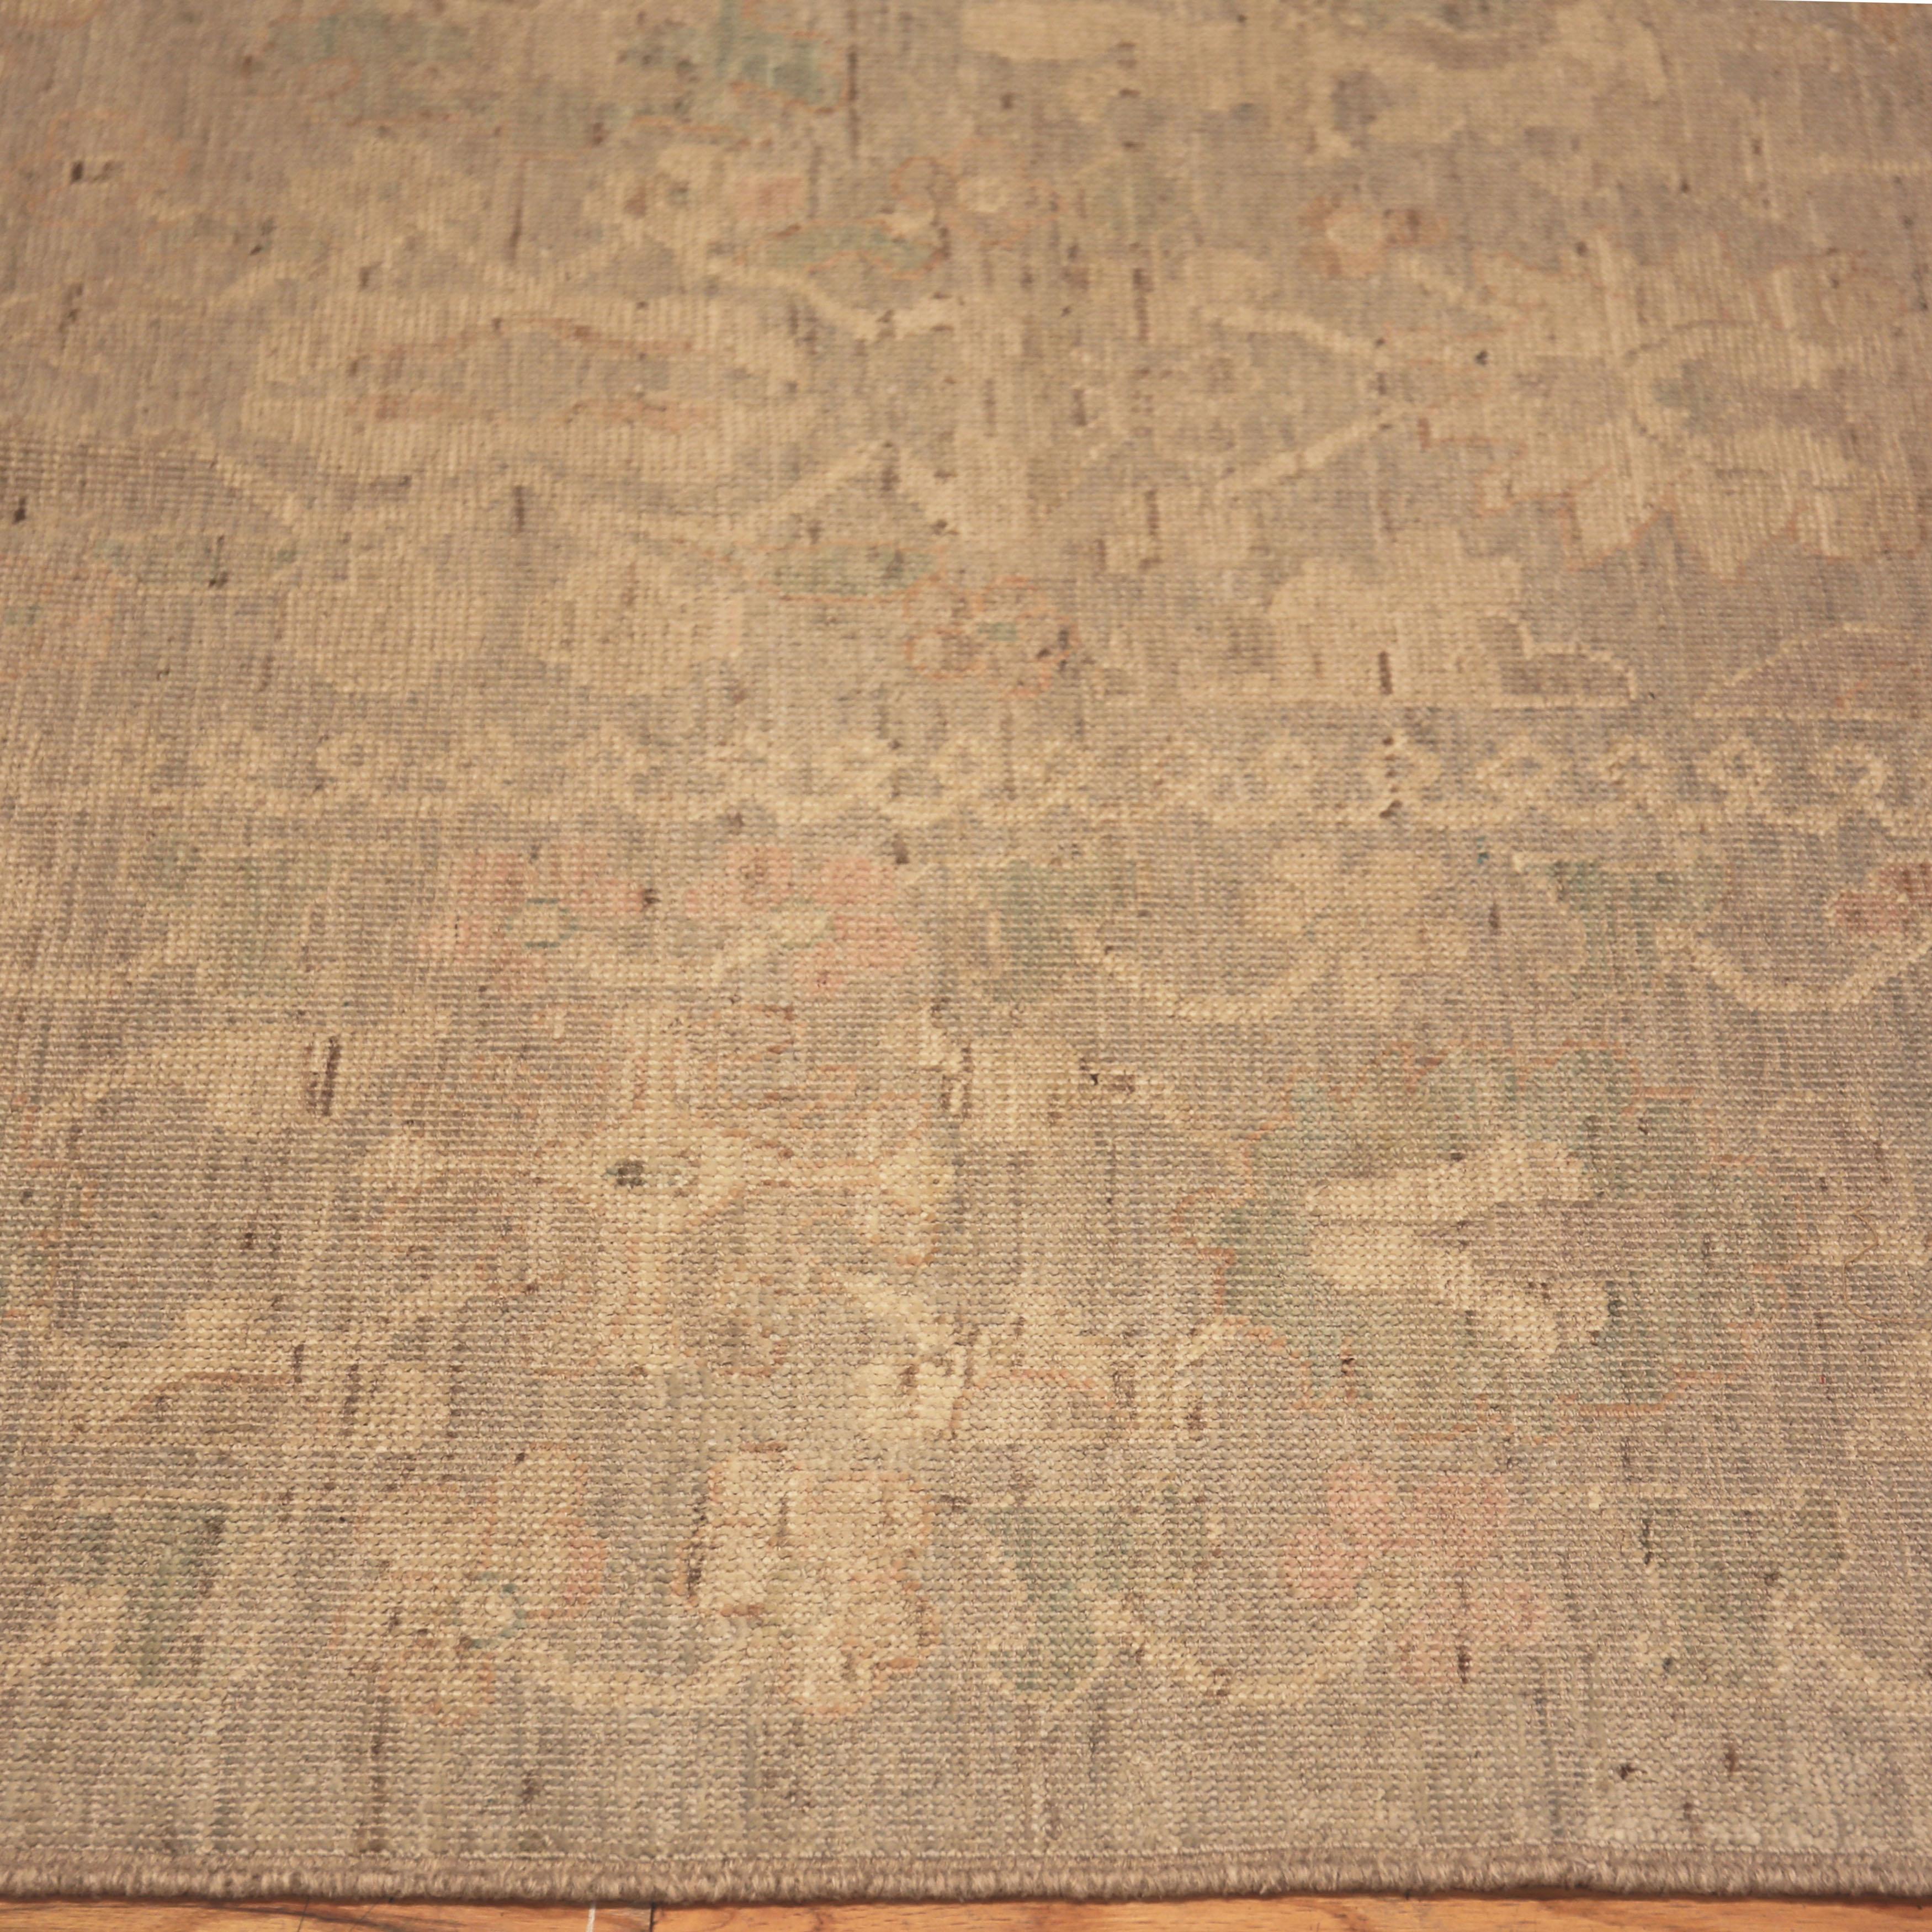 Hand-Knotted abc carpet Multi Modern Wool Rug - 9' x 11'9